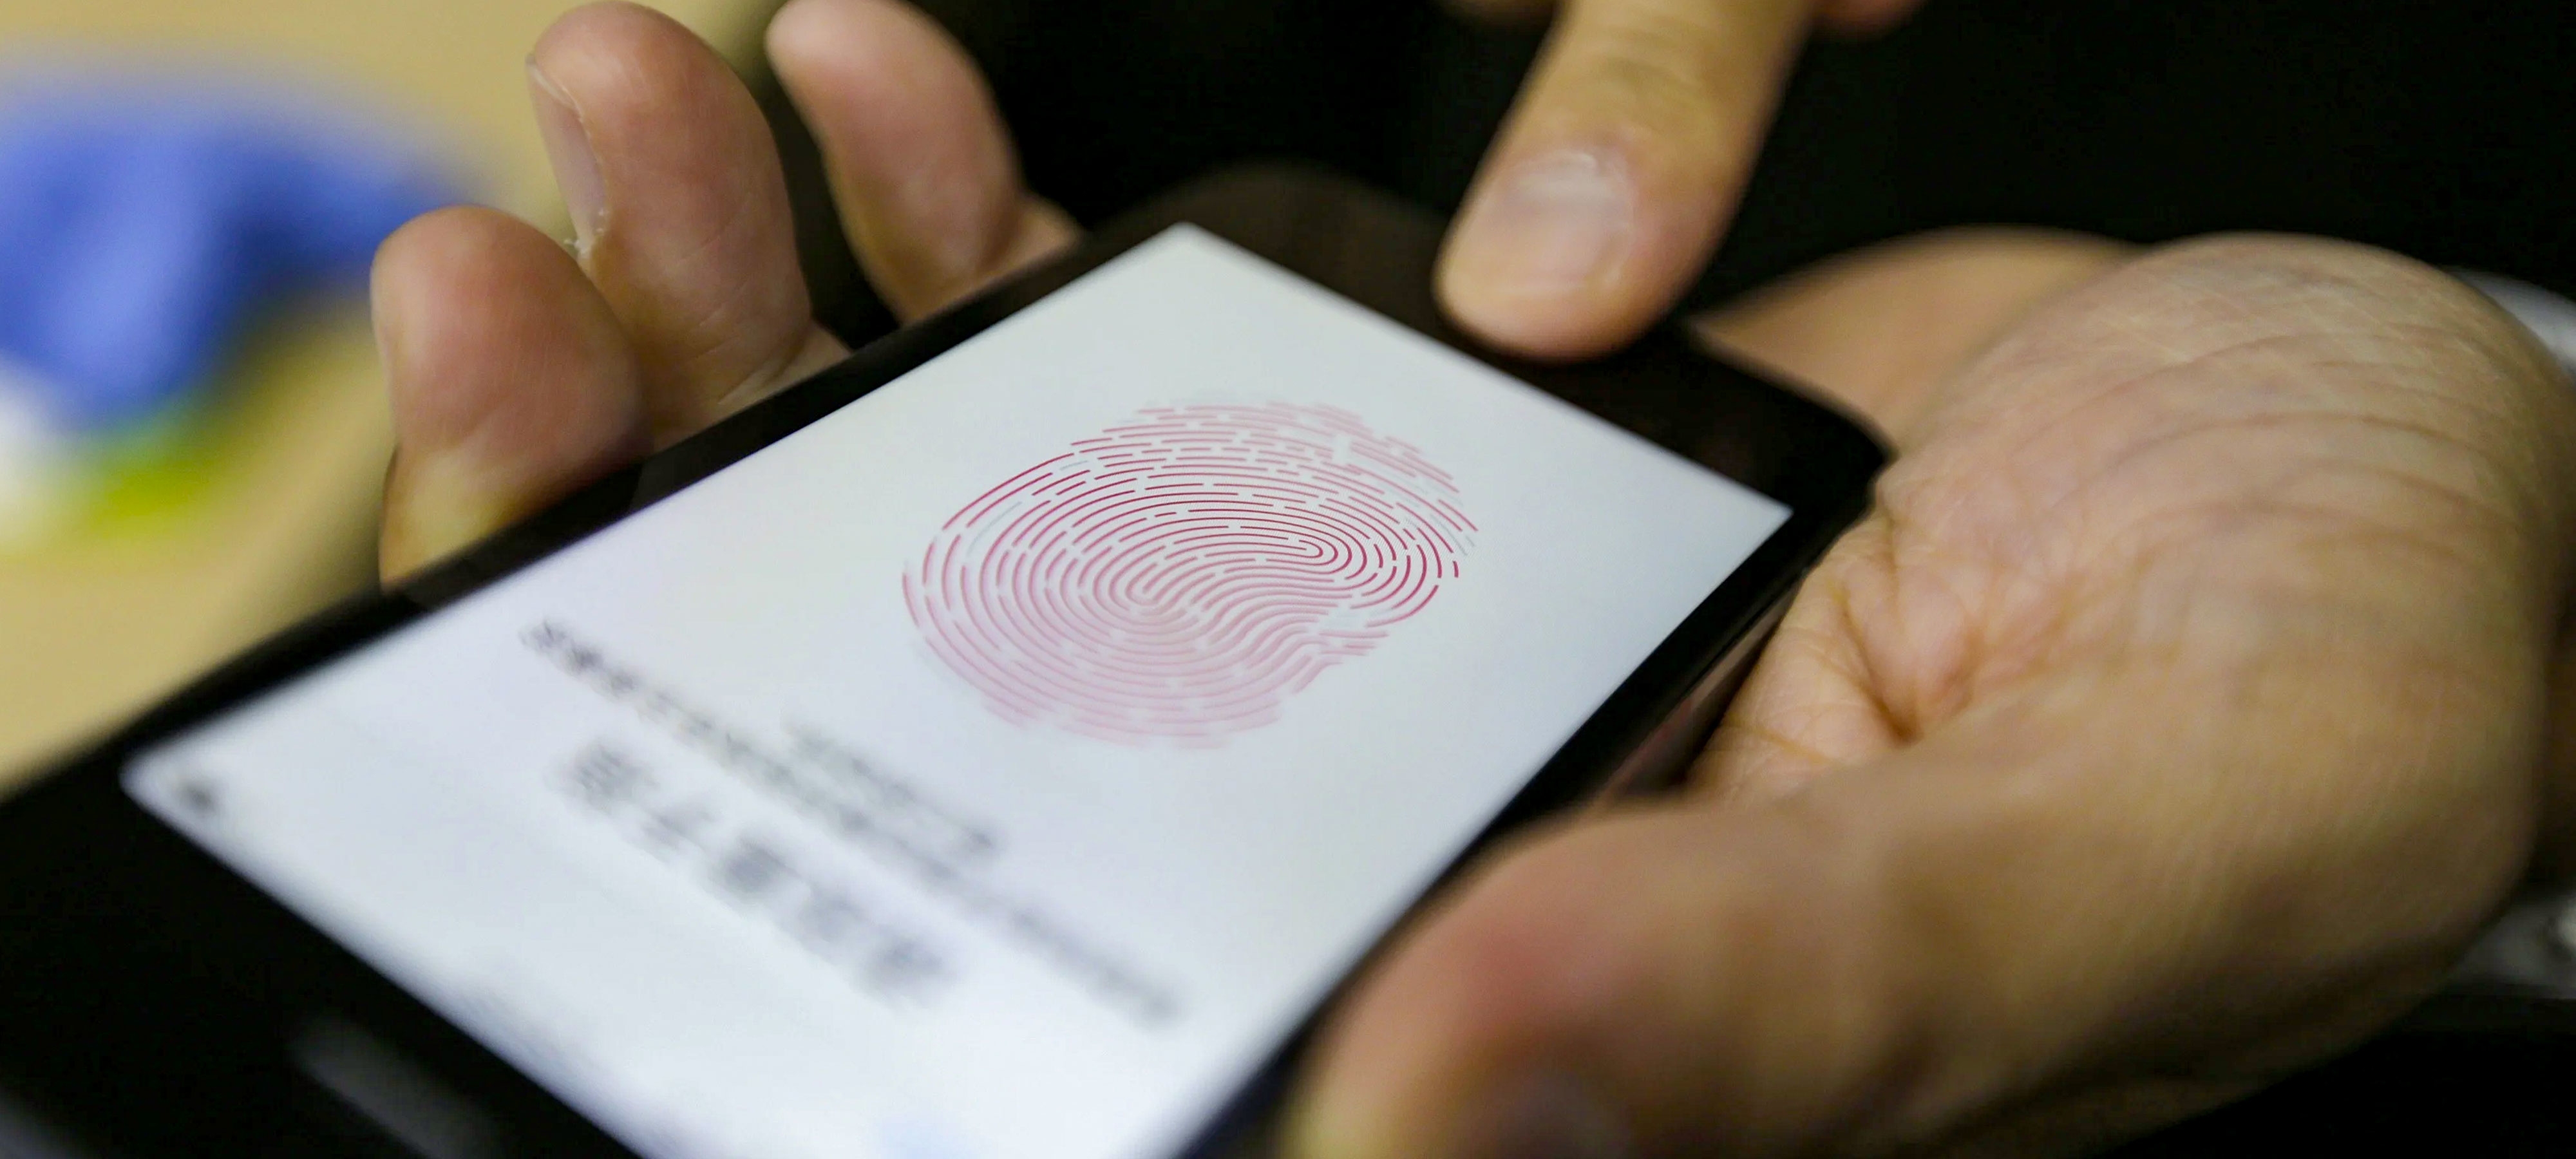 A close-up of hands holding a mobile phone with the screen displaying the image of a fingerprint as the person uploads their biometric data in the form of their fingerprint.